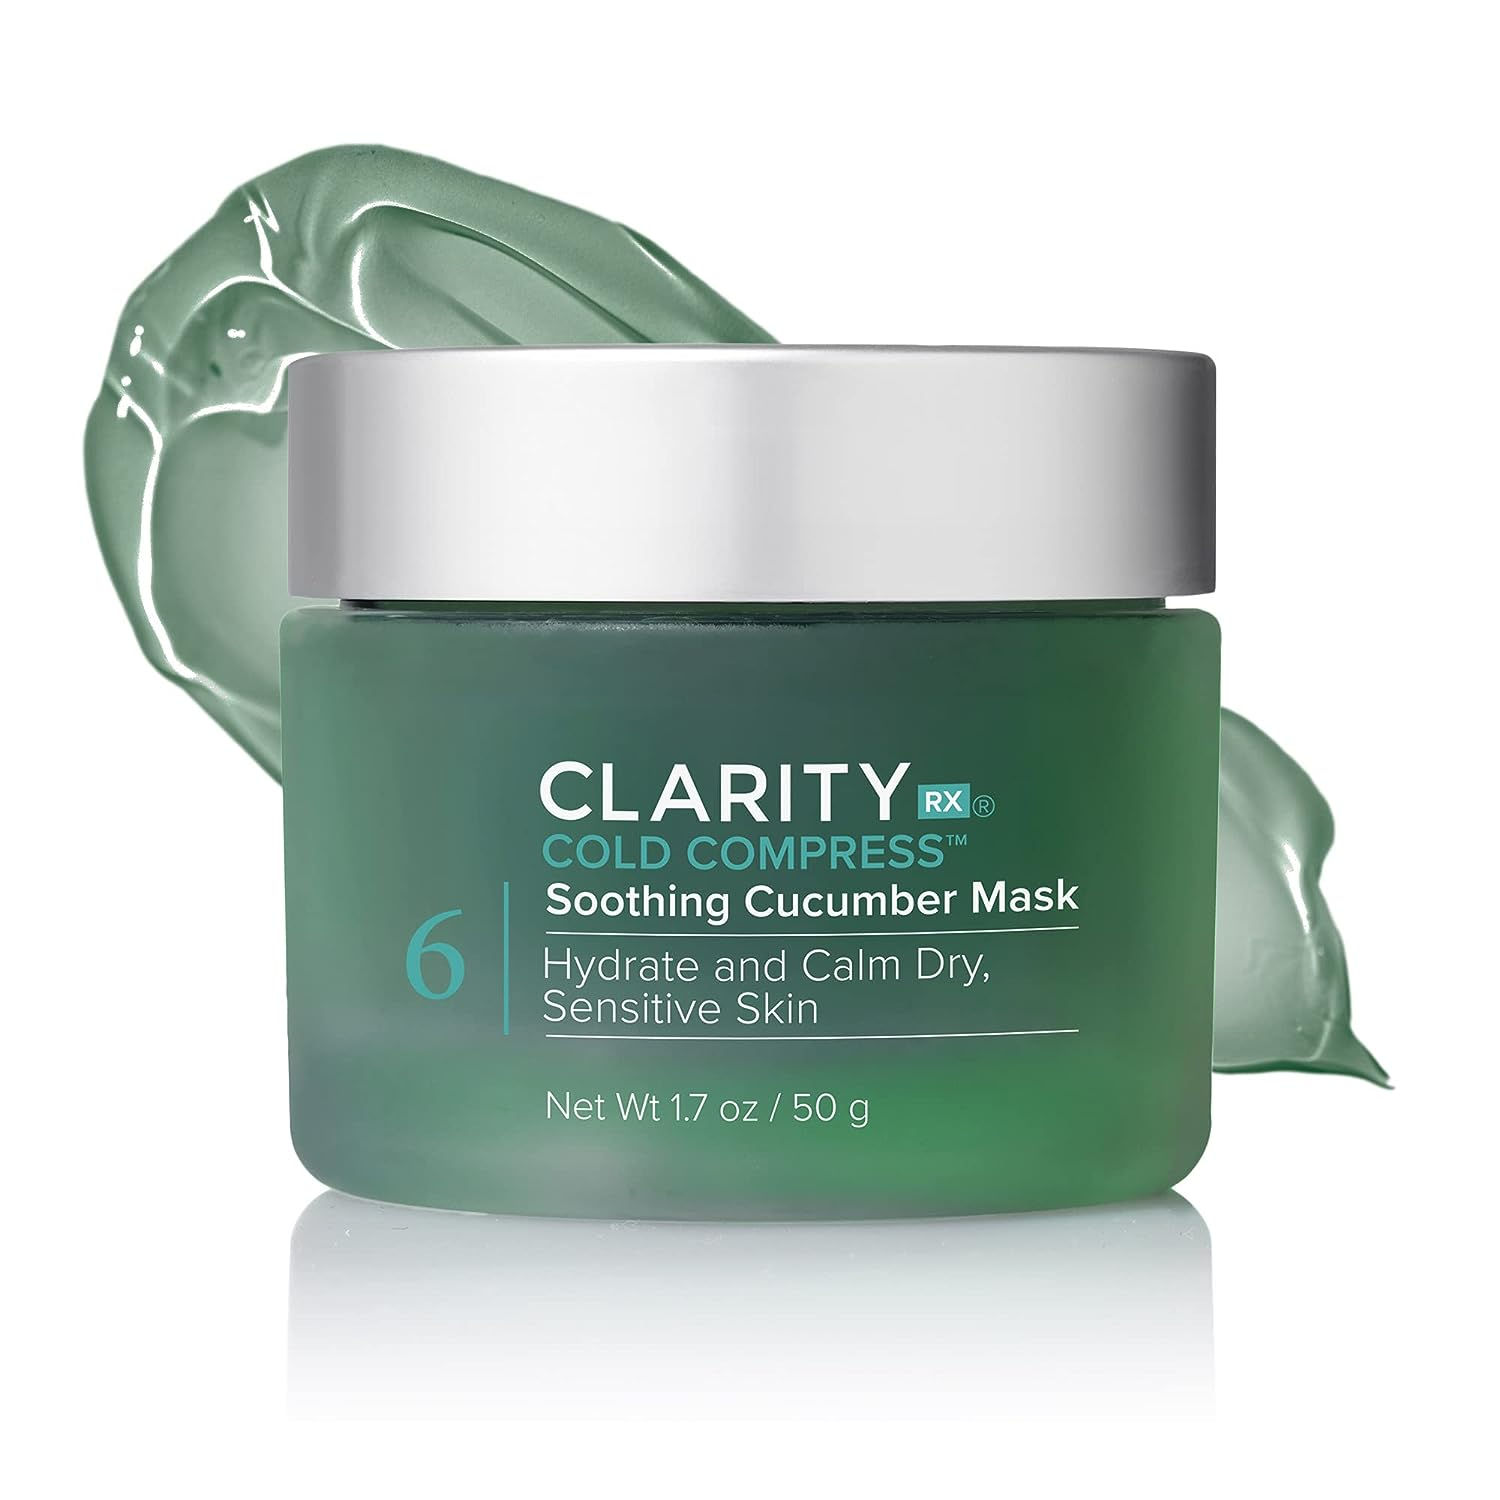 ClarityRx’s Cold Compress Soothing Cucumber Mask for cucumber benefits for skin